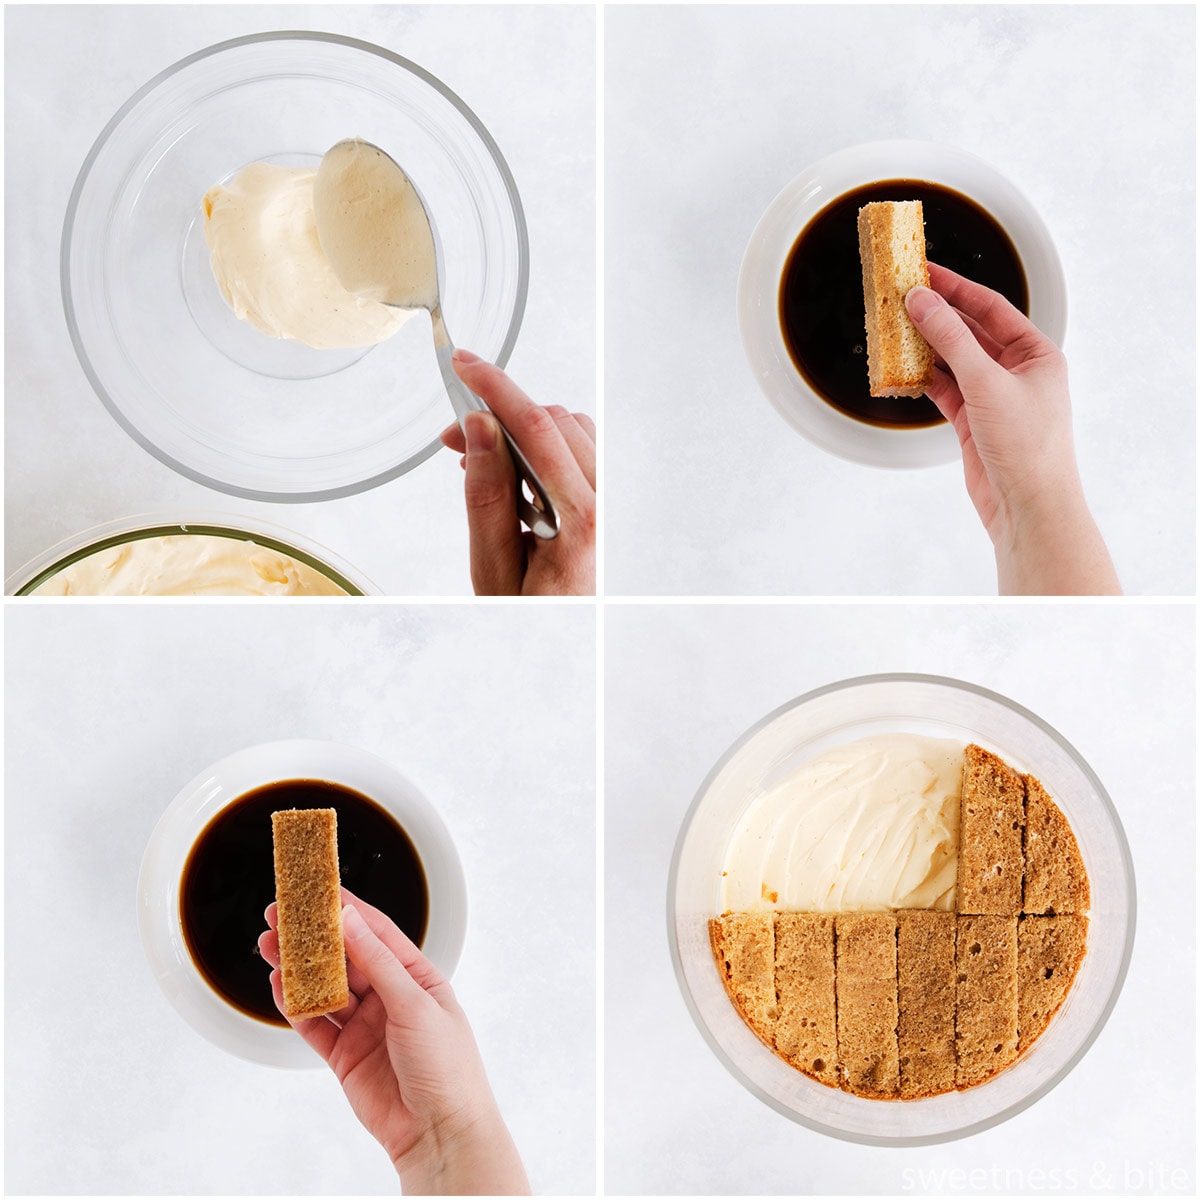 Collage of four images showing the sponge being dipped in coffee and layered with the cream mixture in the bowl.